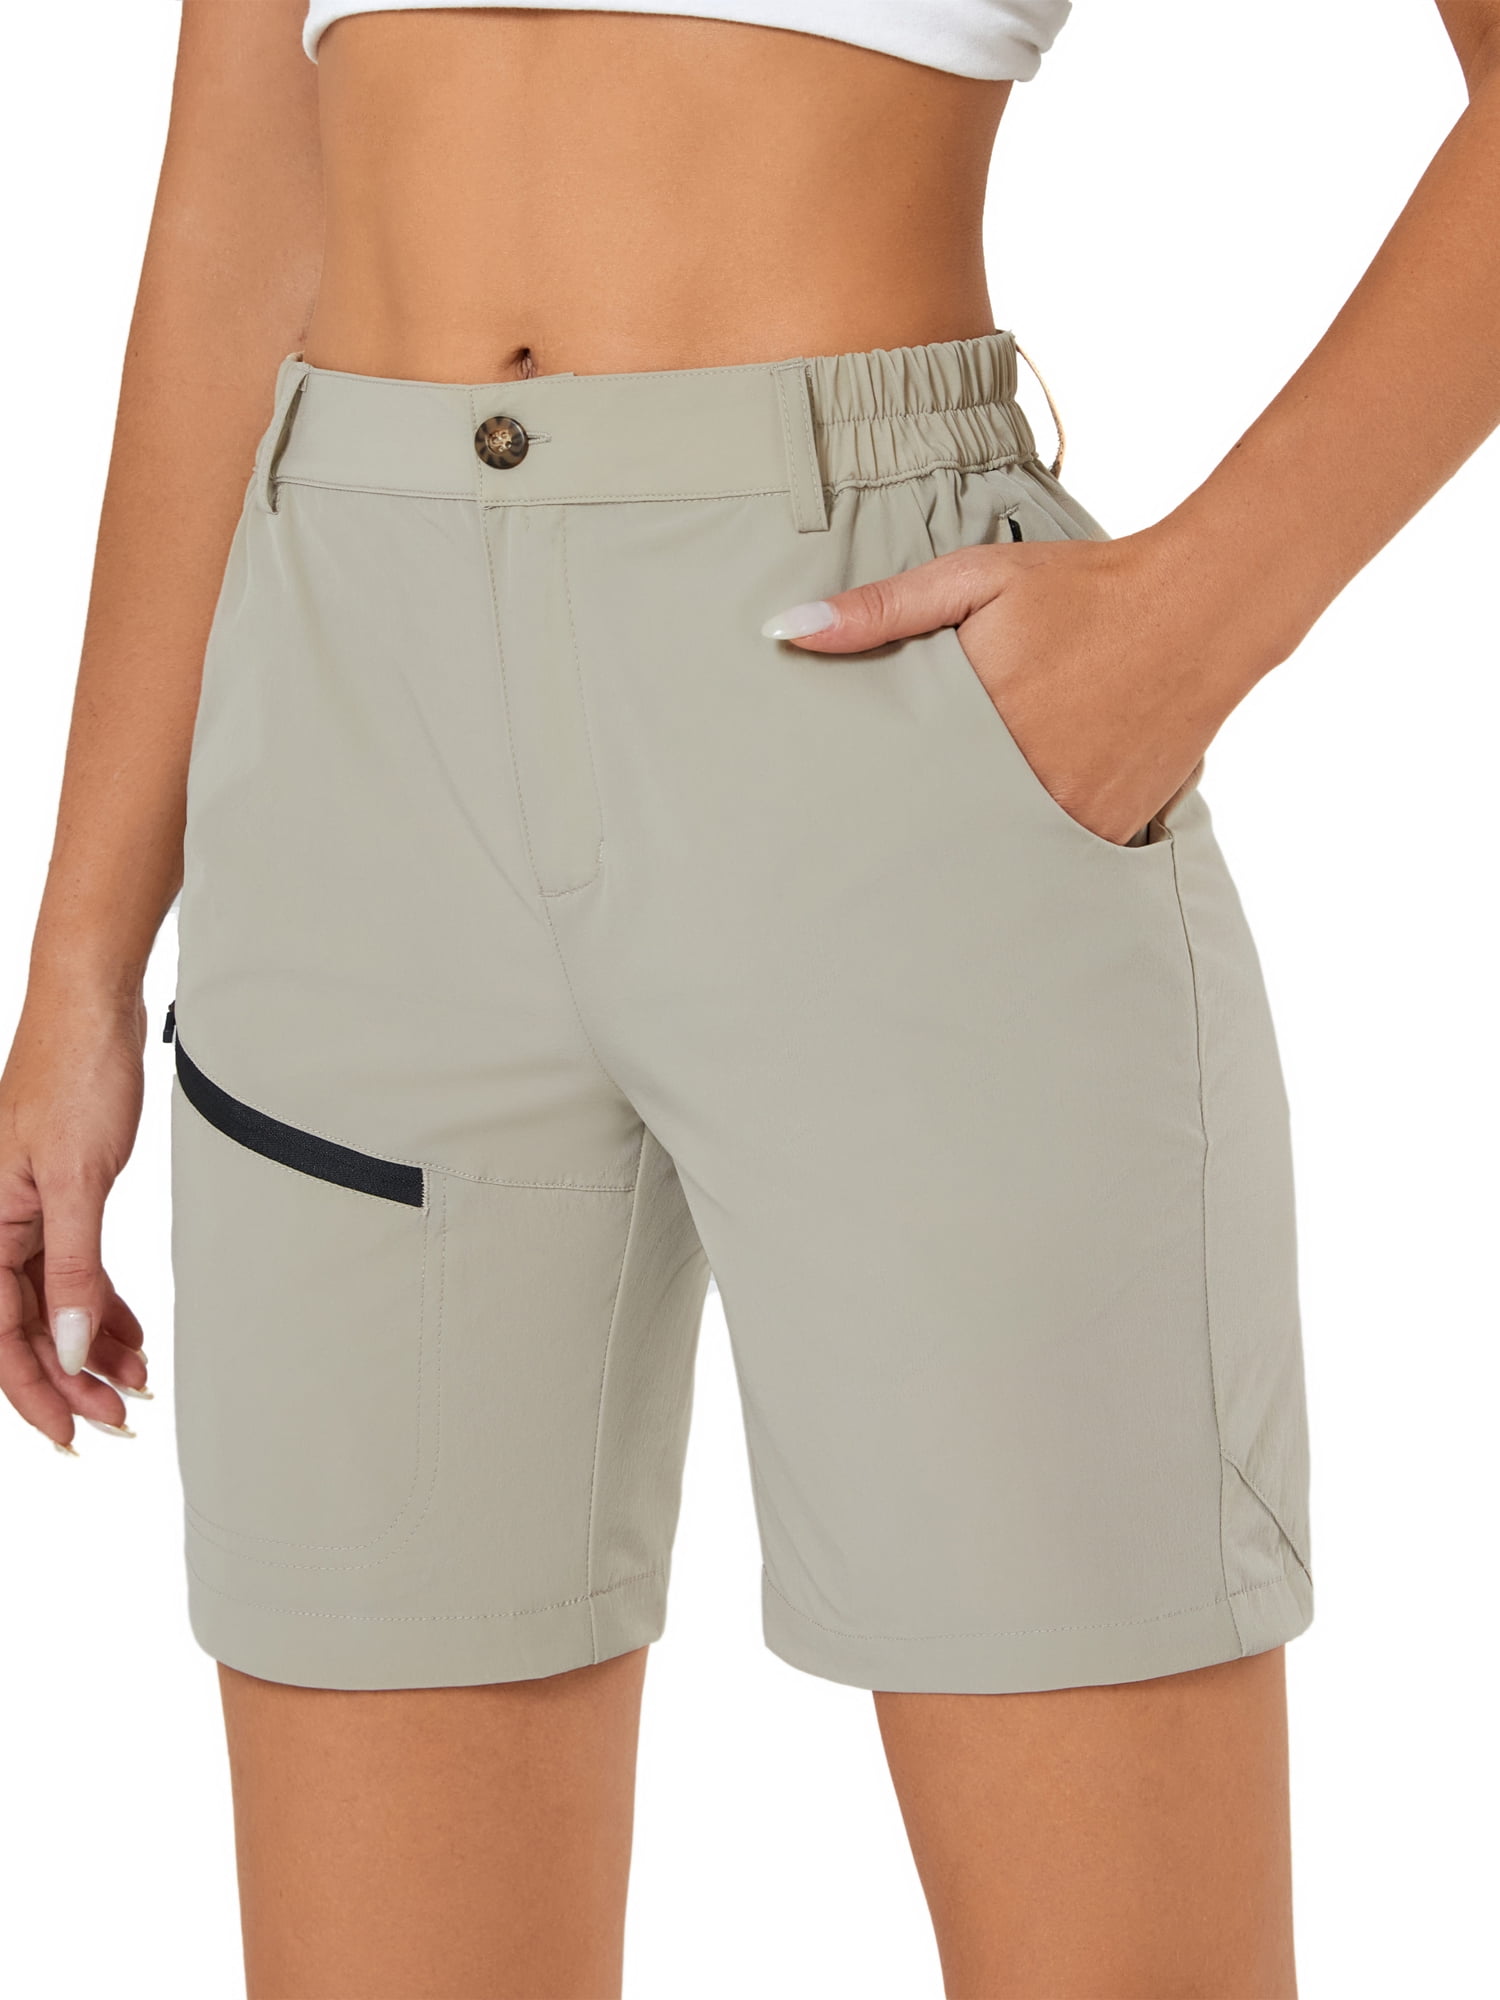 WindRiver Women's Performance Quick Dry Shorts with Zippered Cargo Pockets